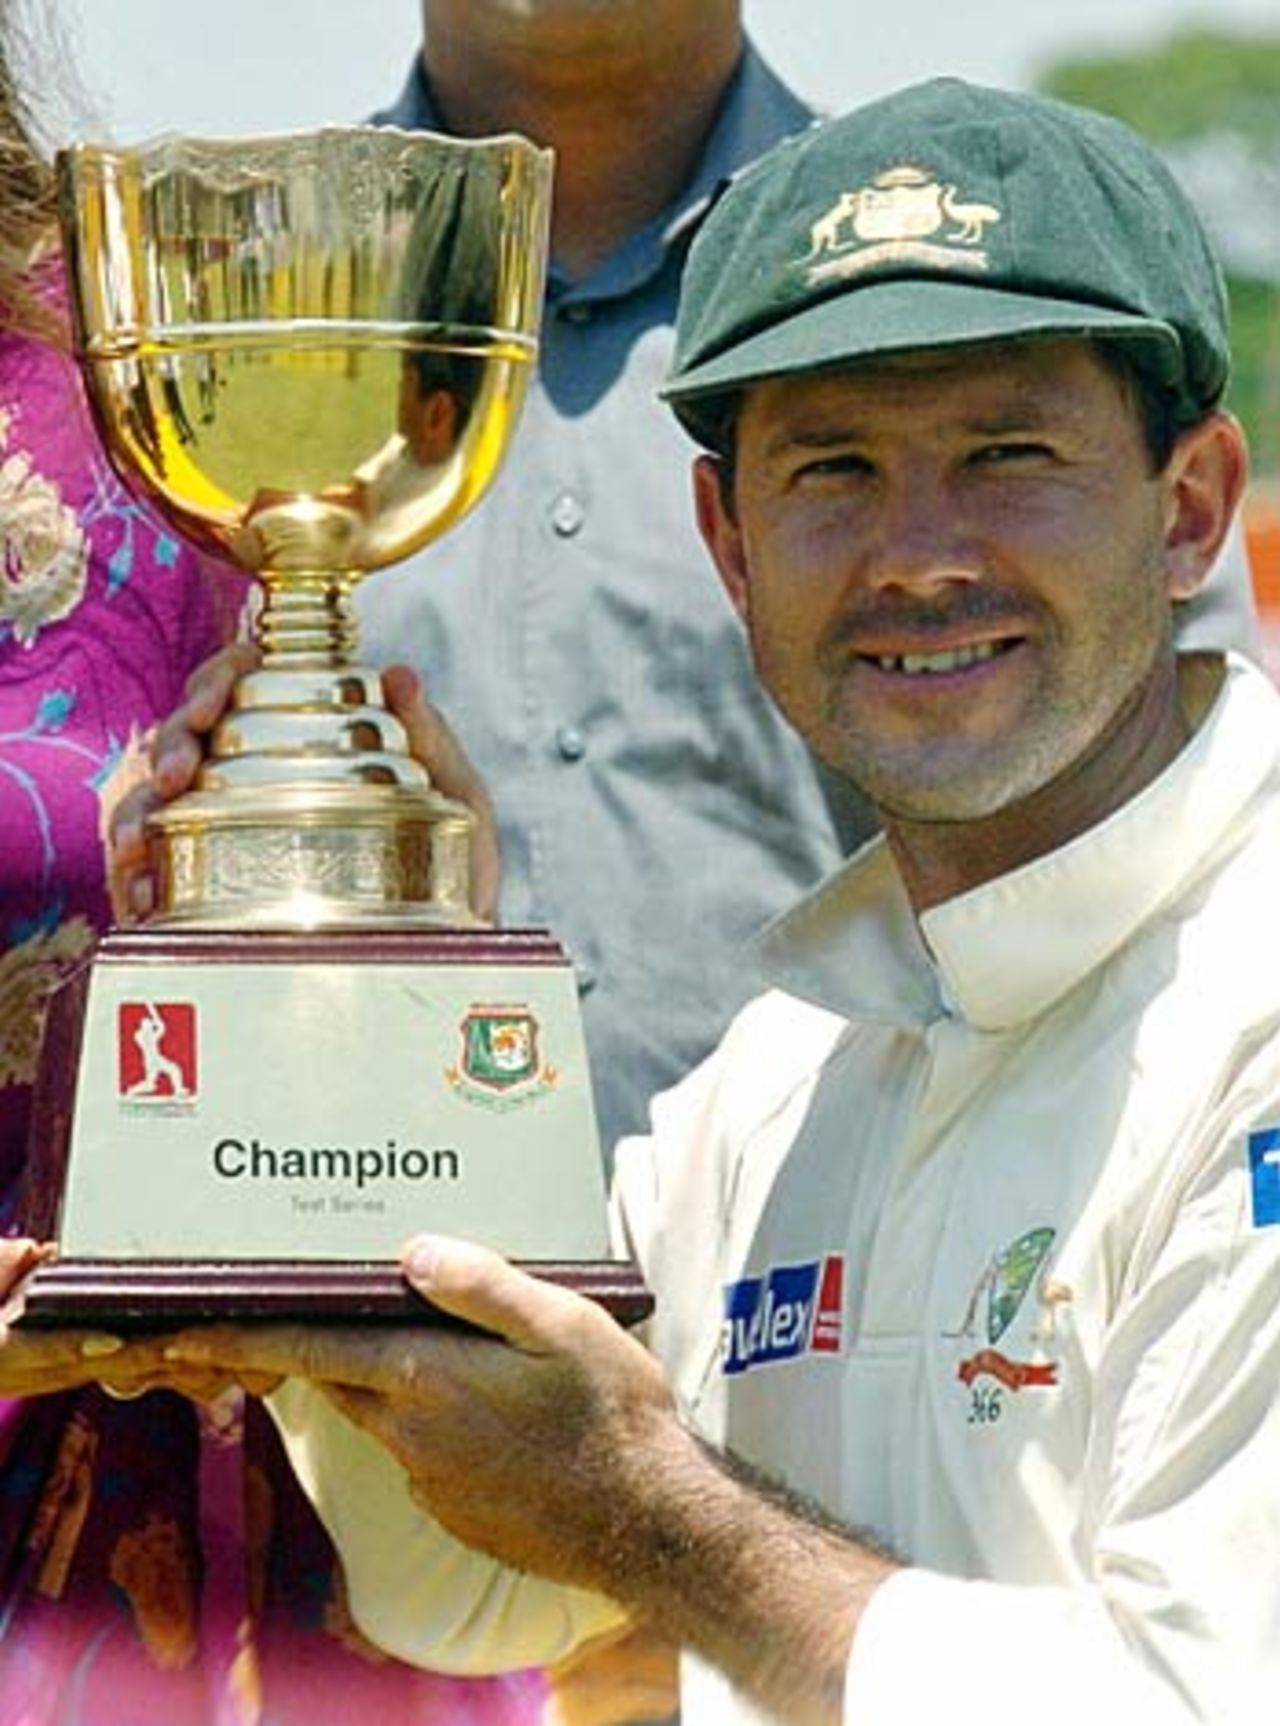 Ricky Ponting poses with the trophy, Bangladesh v Australia, 2nd Test, Chittagong, April 20, 2006